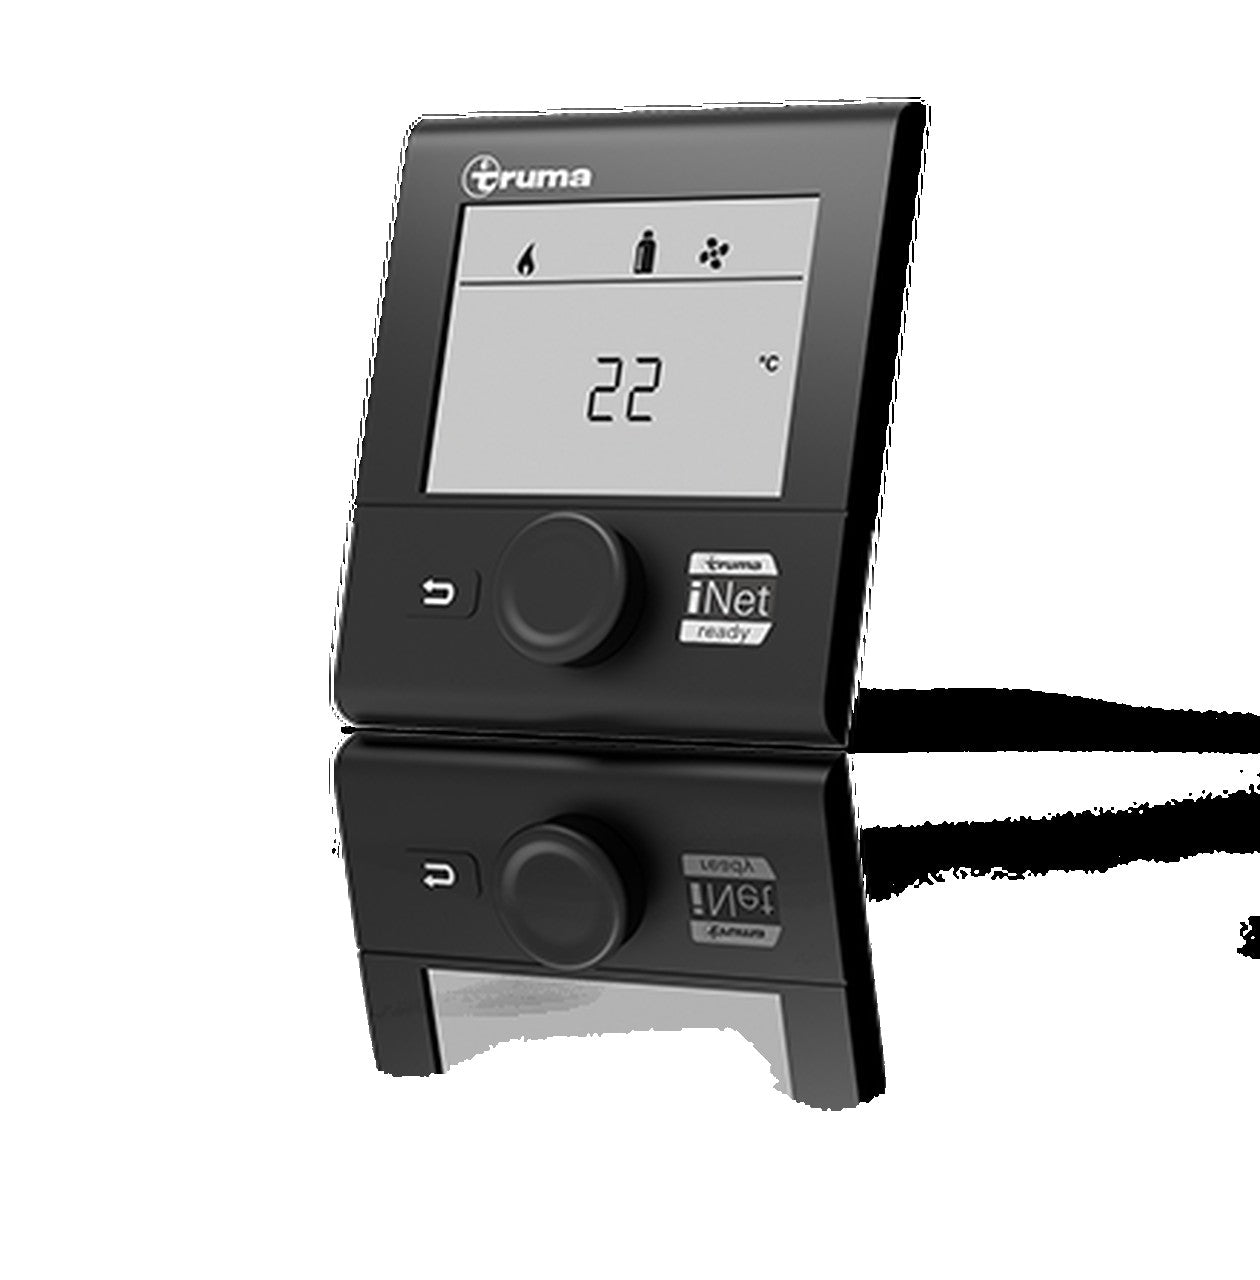 Truma Varioheat CP Plus Control panel - see our other listing for Combi, Everything Caravans